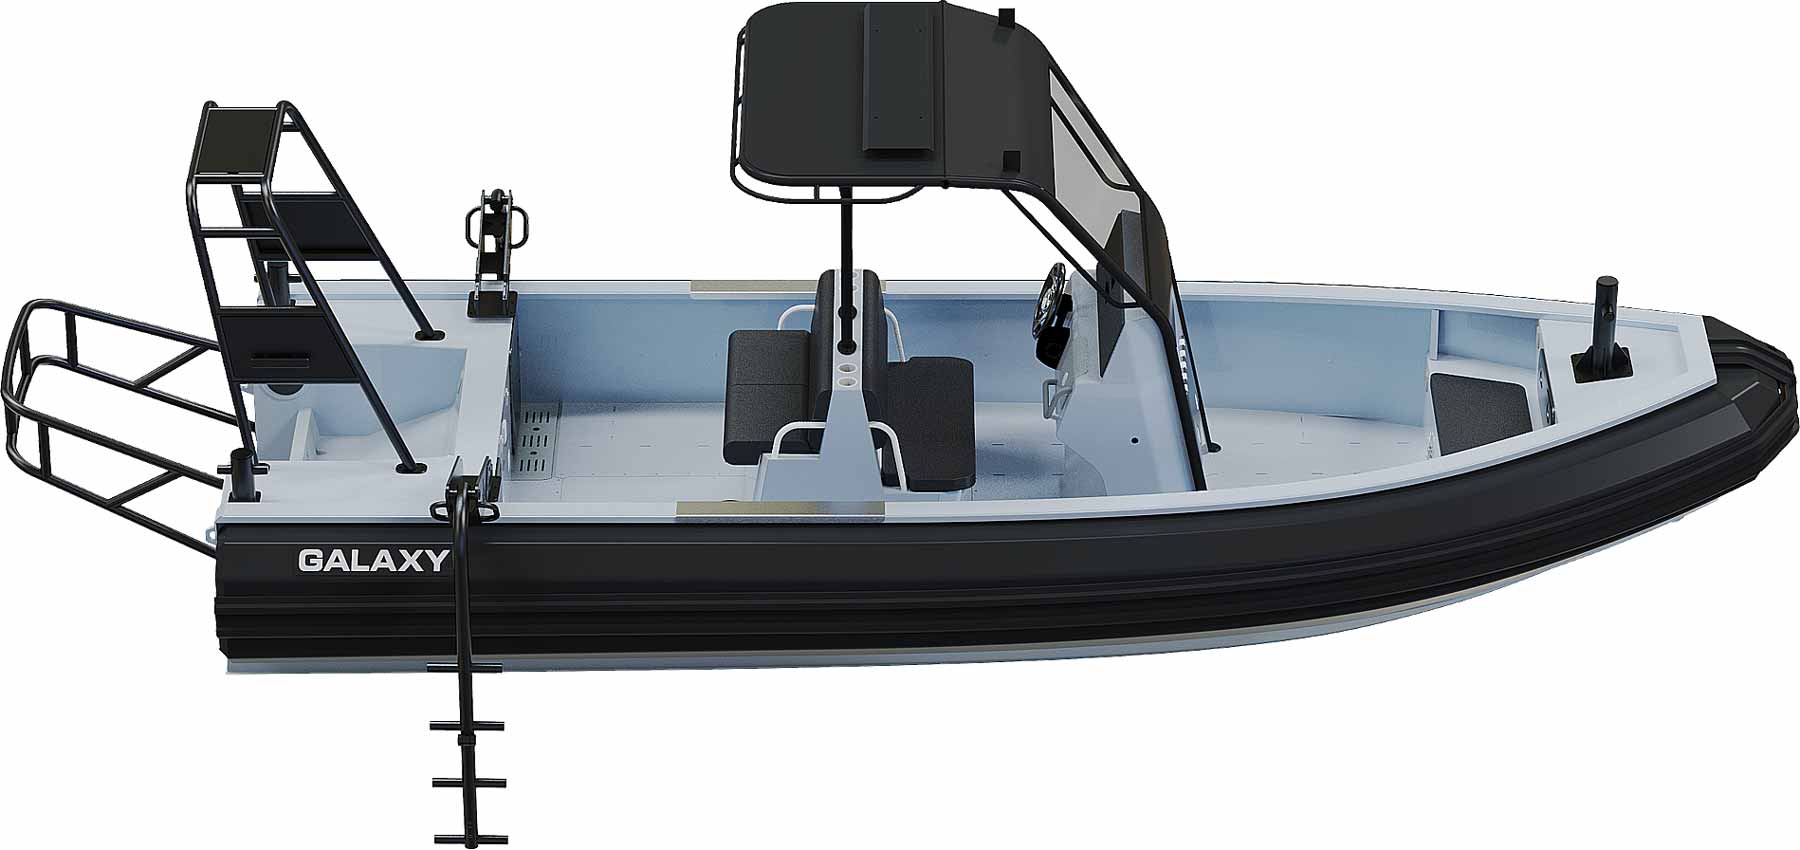 GALAXY Trident professional rigid inflatable boat (RIB) at 21′ 4” long, rated for max 300 HP, with aluminum hull, steering console, T-top, seating, arch, engine guard, and ladders.